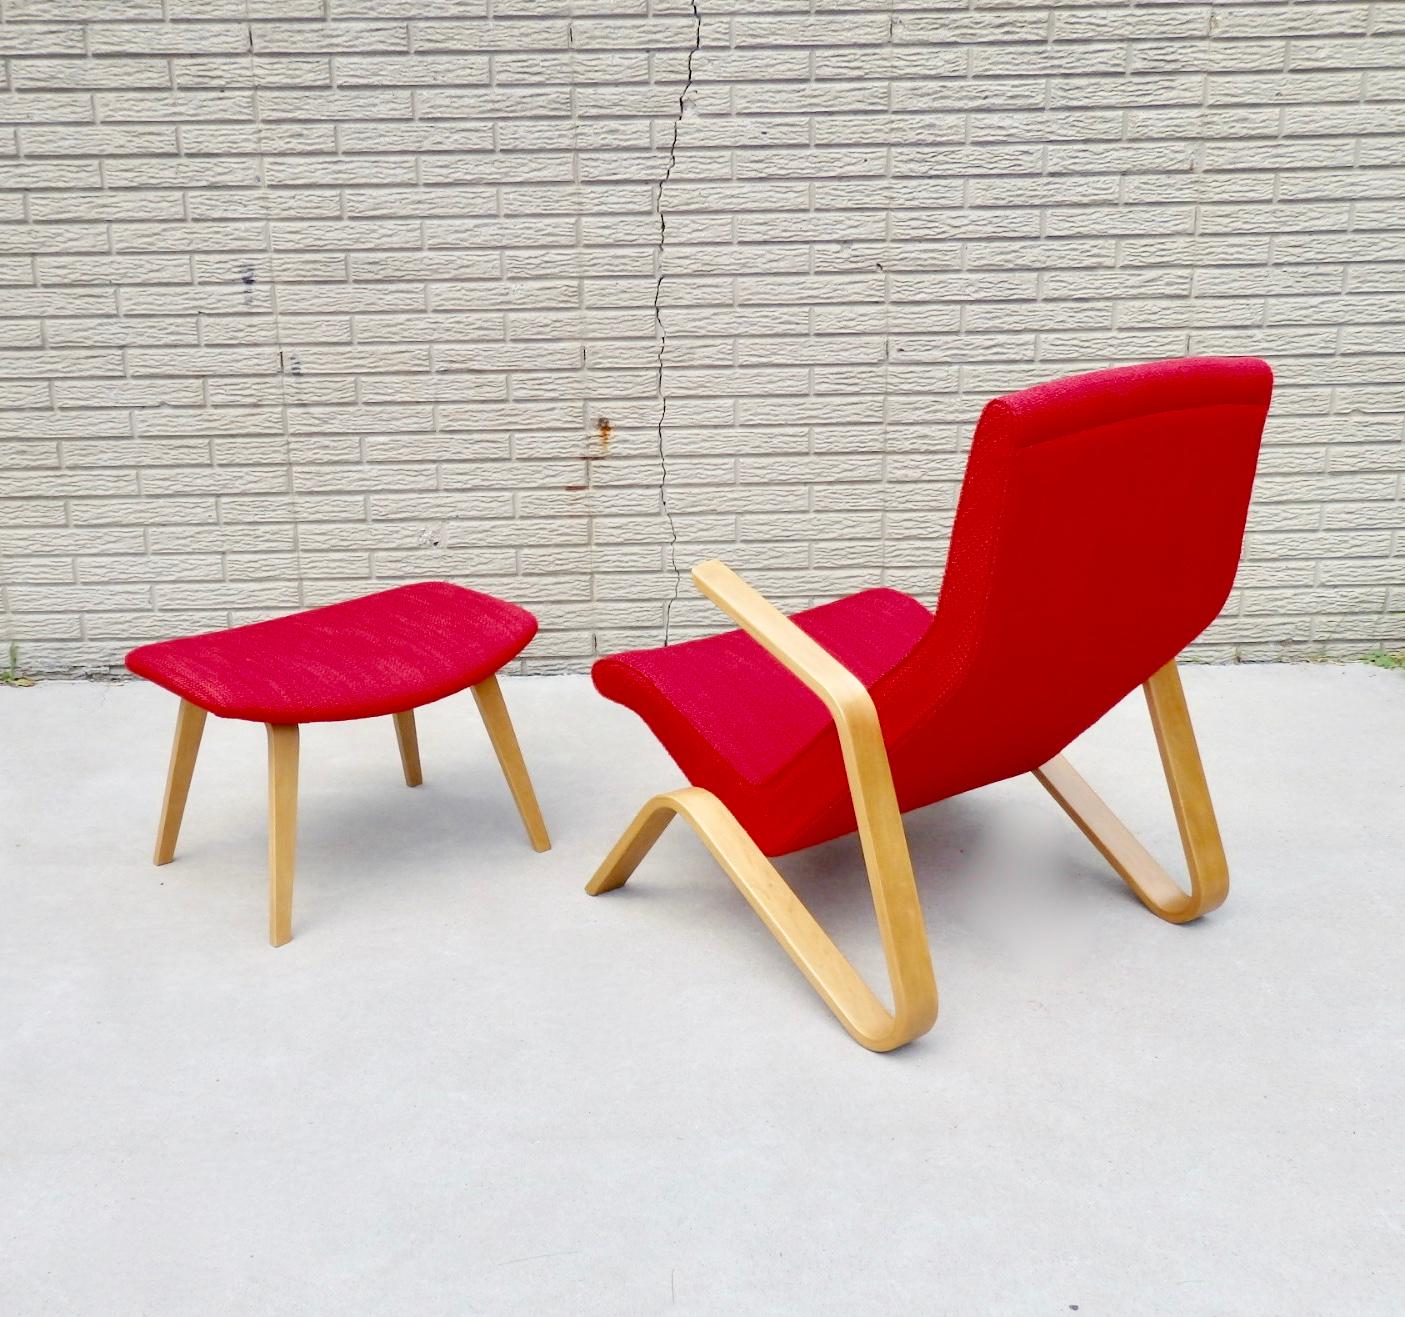 Upholstery Early Eero Saarinen for HG Knoll Grasshopper Chair in Scarlet Rivington Textile